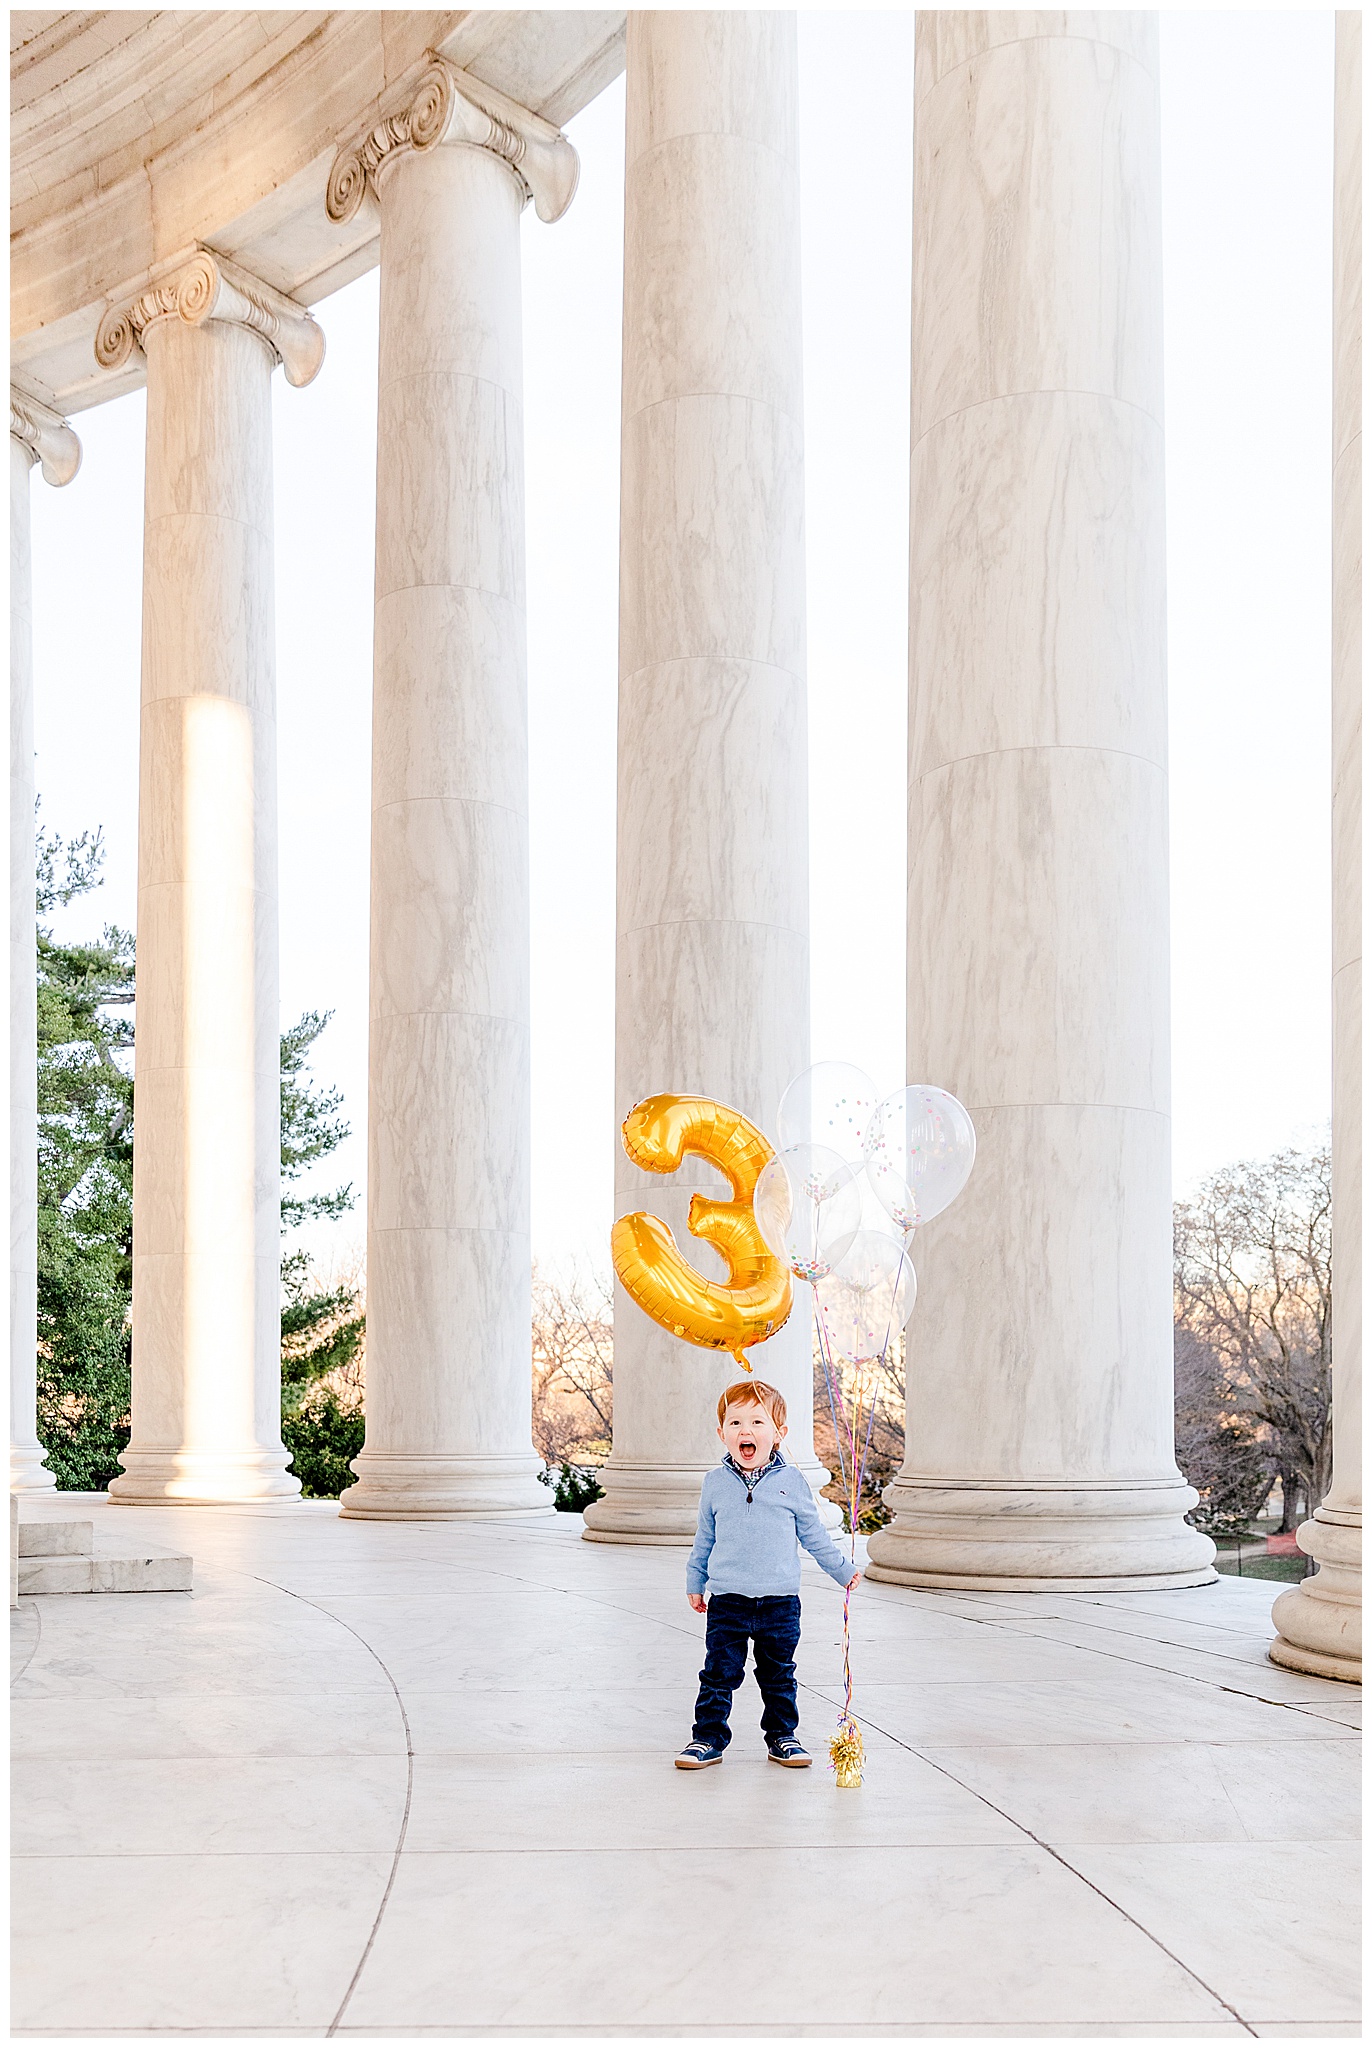 Children's Portrait at the Jefferson Memorial in Washington, DC by Bethany and John Kofmehl